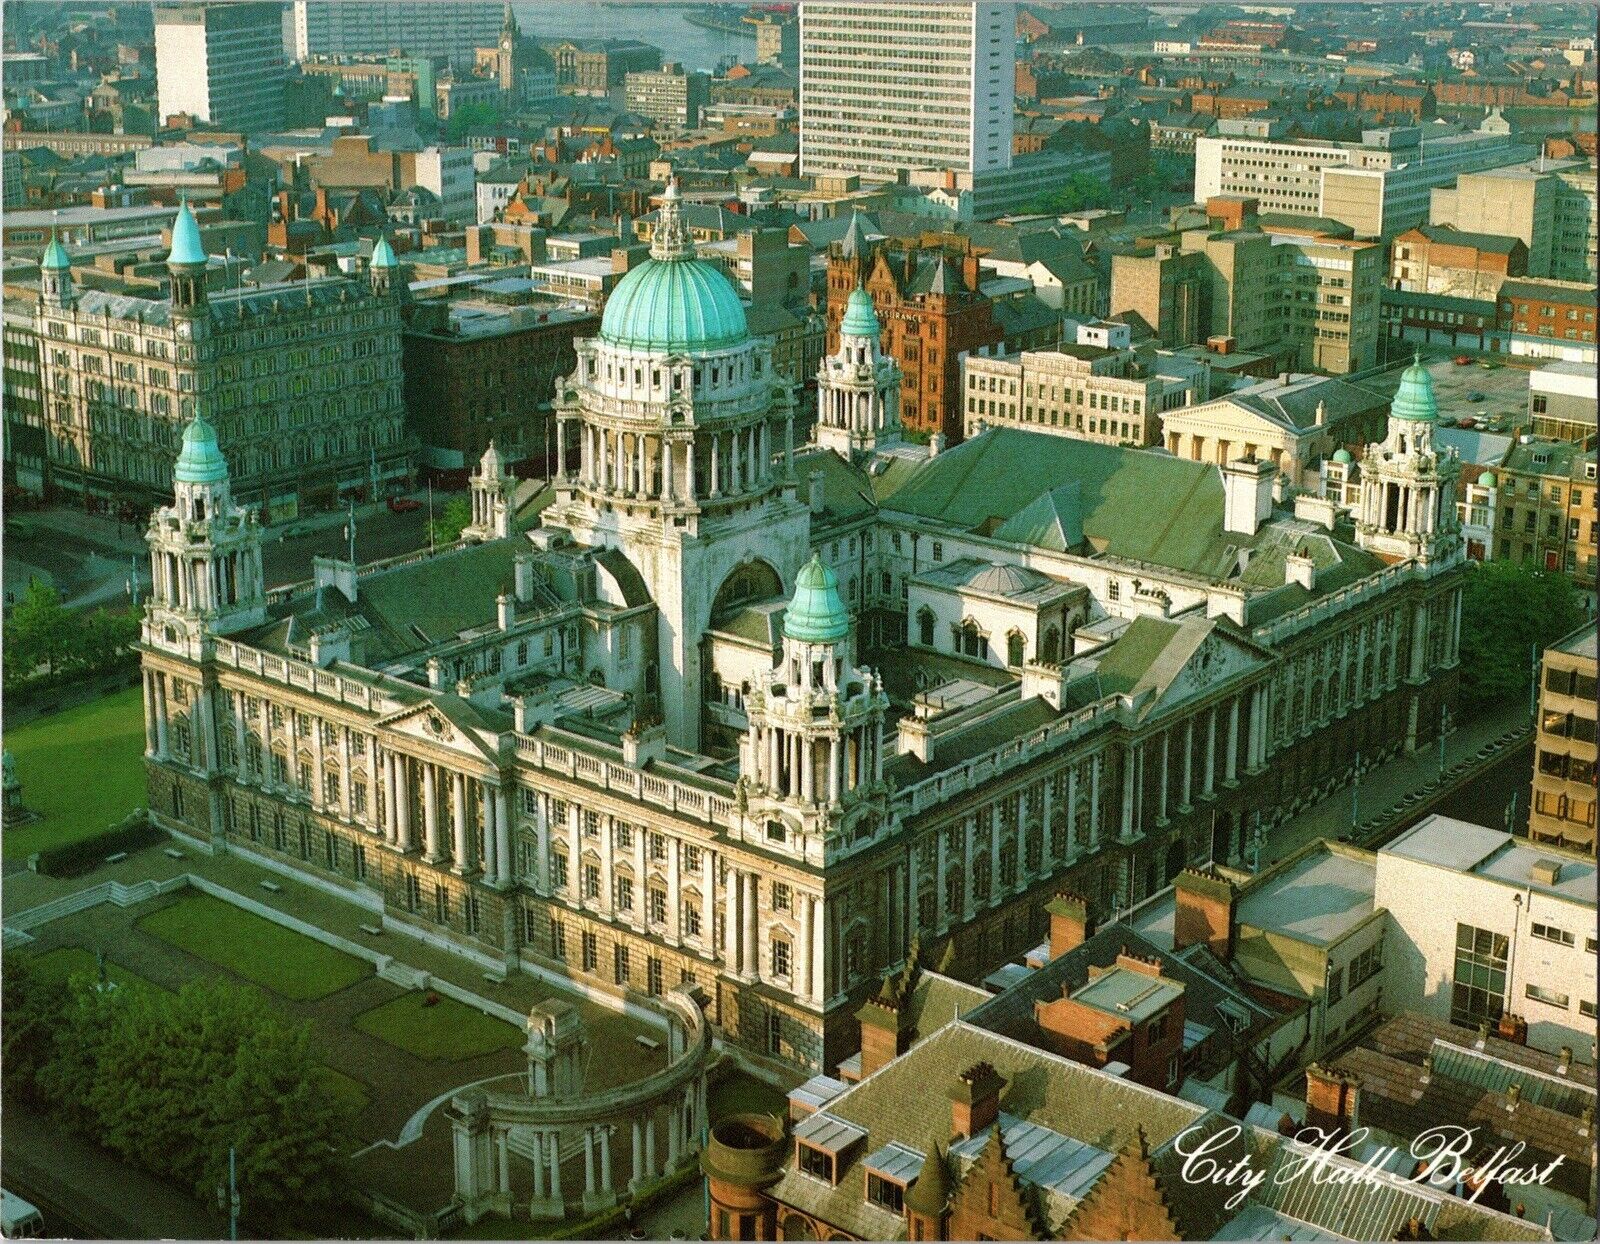 Ireland Postcard: Aerial View Of City Hall In Belfast